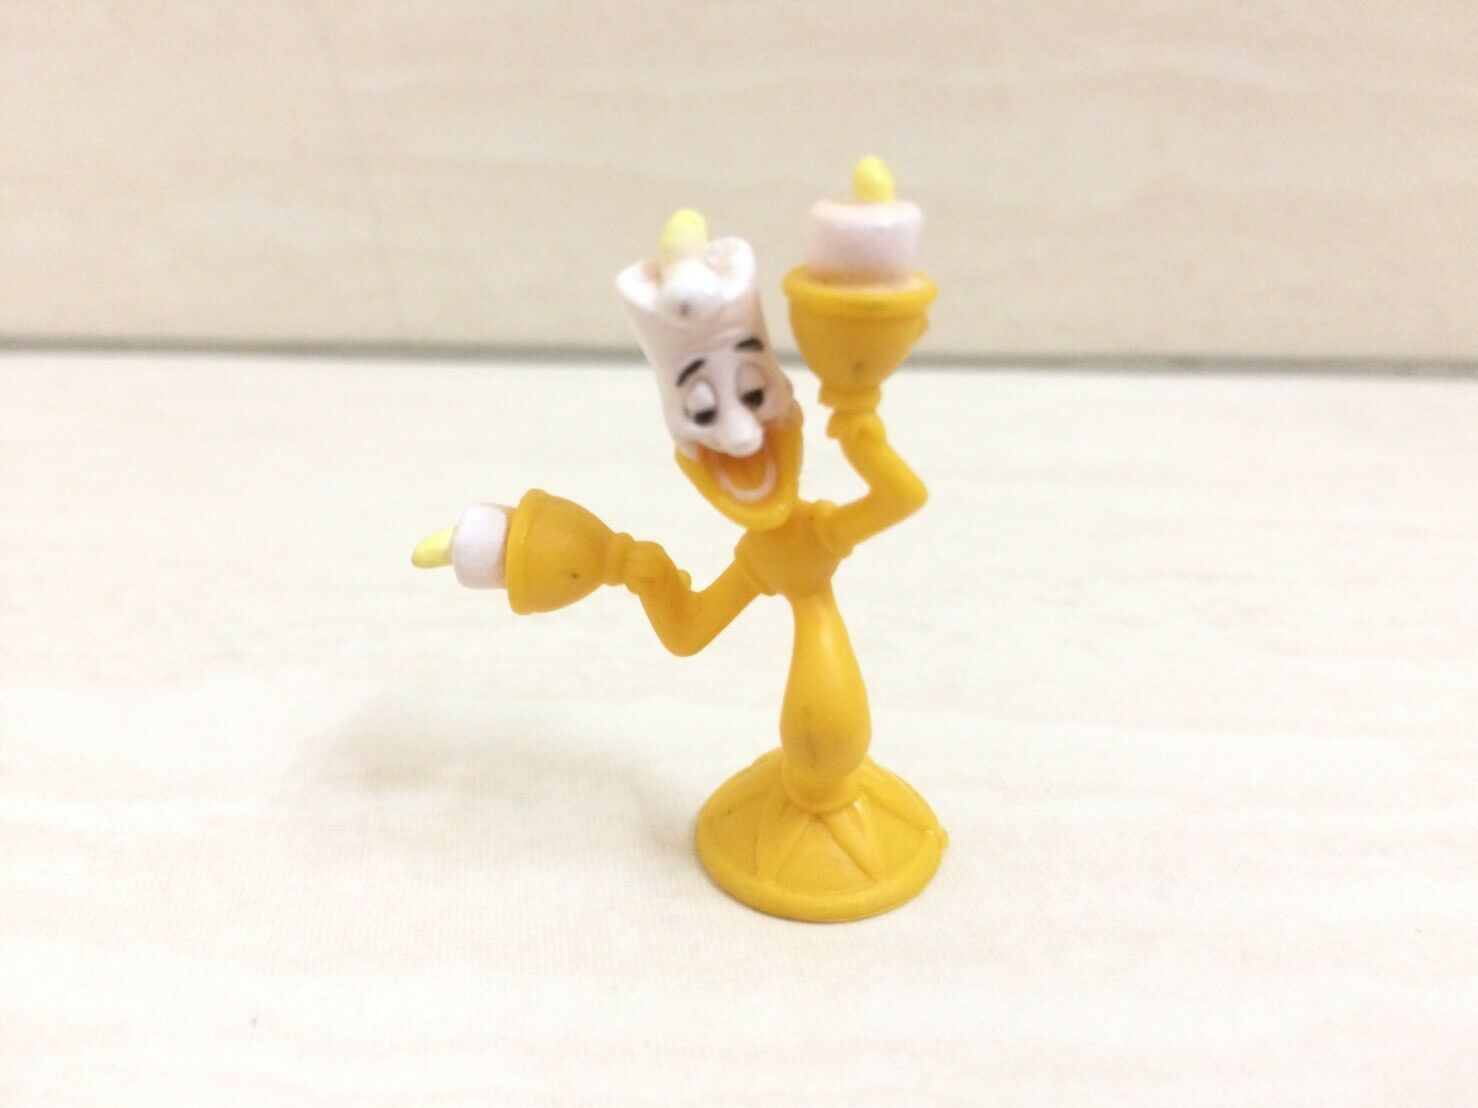 Disney Lumiere Figure from Beauty and the Beast. Cute, Rare Collection - $9.99